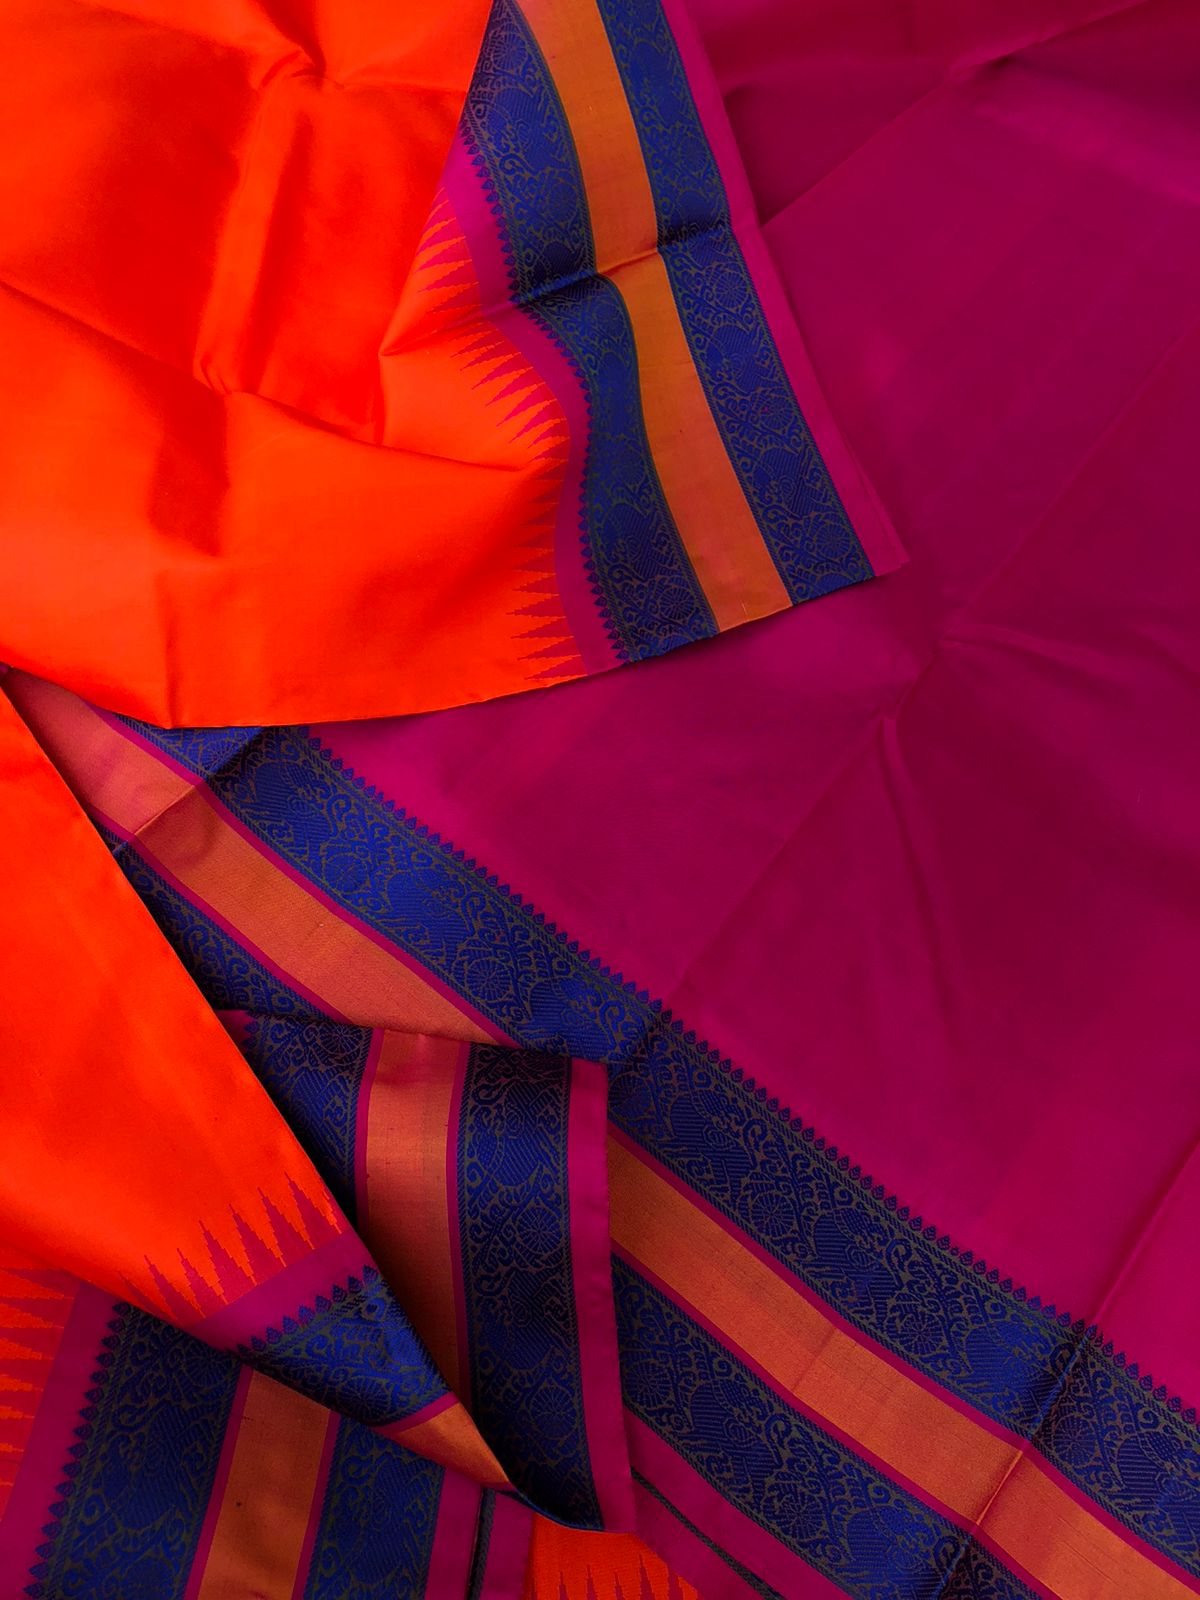 Festive Vibes on No Zari Korvai Kanchivaram - vibrant orange and pink with motifs woven in deep ink blue